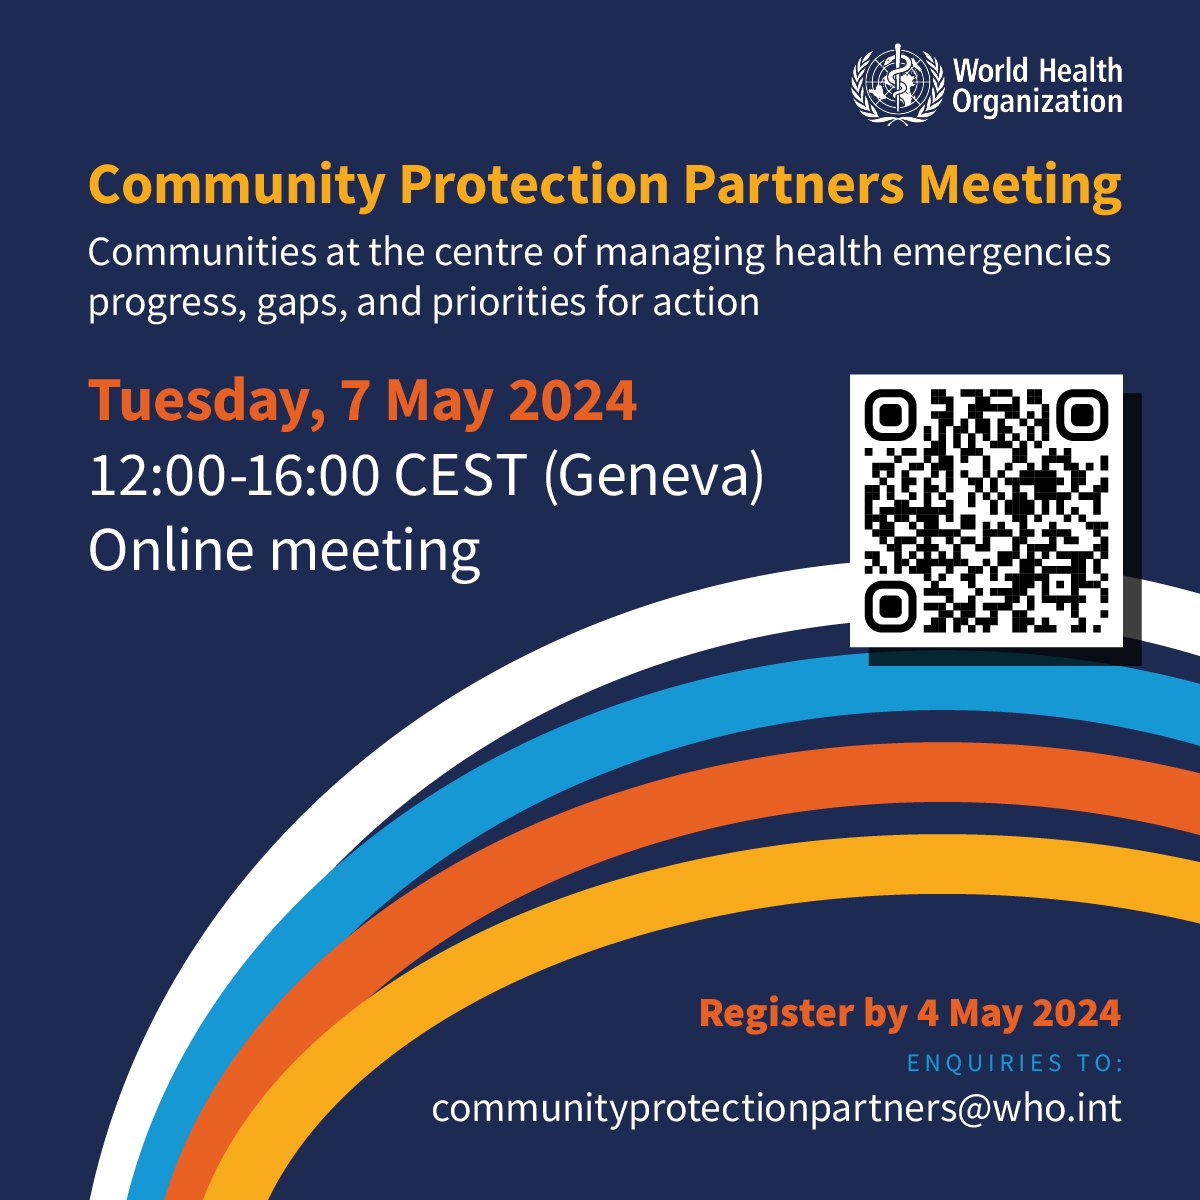 TOMORROW! This @WHO event on May 7th will review good practice & progress to date on advancing community-centred health emergency management; review good practice & challenges for advancing community protection; and discuss modalities for partnerships: tinyurl.com/mmrapzny